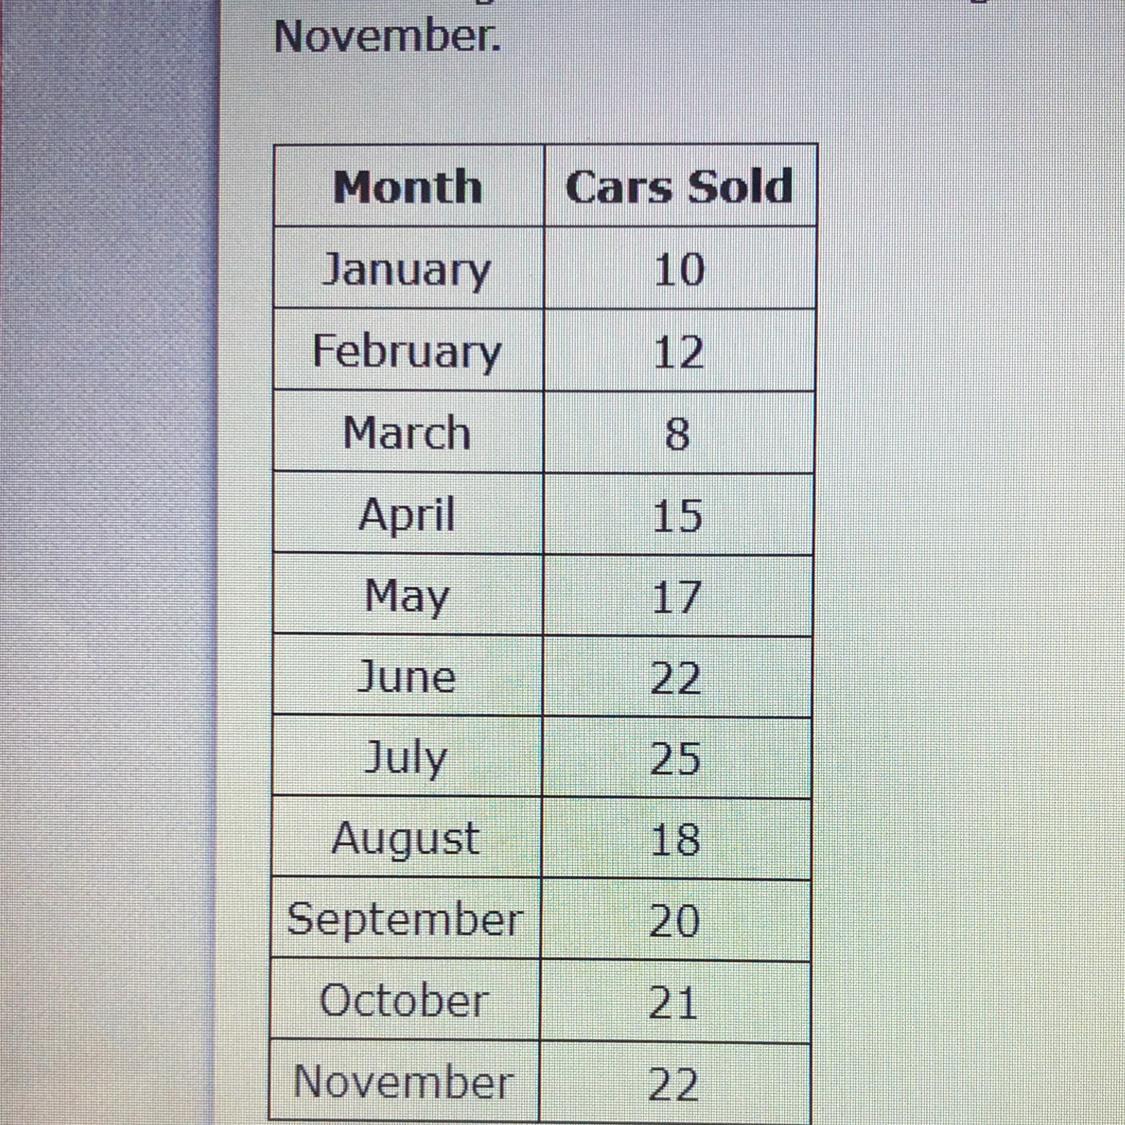 Charlies Goal Is To Sell An Average Of 18 Cars Each Month This Year. This Table Shows How Many Cars He